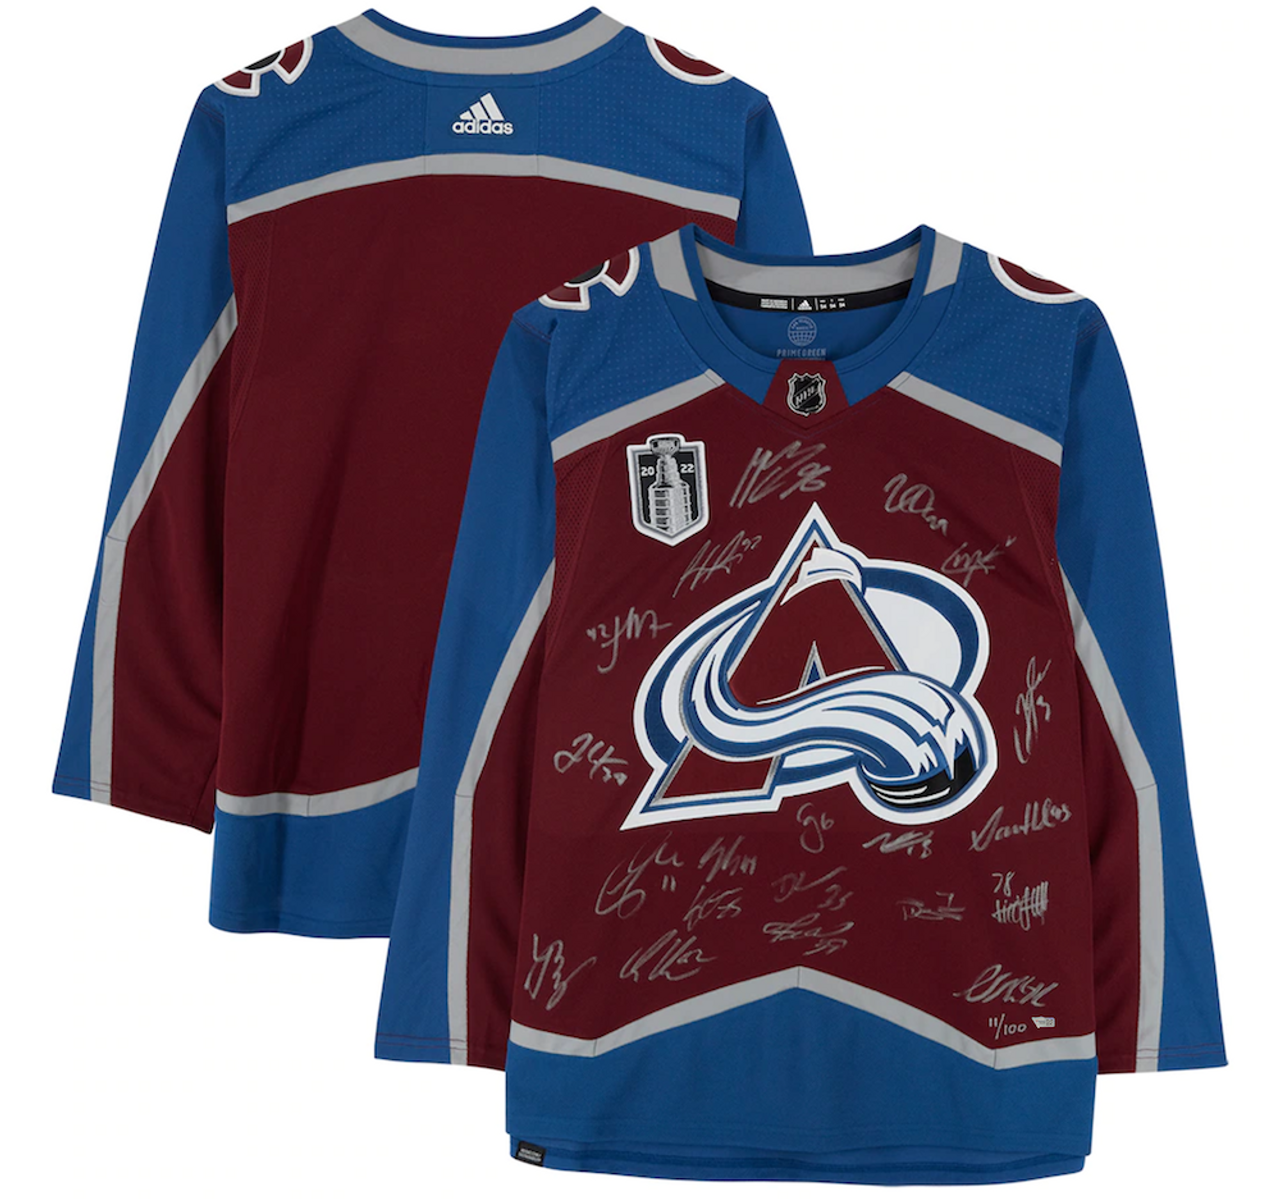 Colorado Avalanche Signed Jerseys, Collectible Avalanche Jerseys